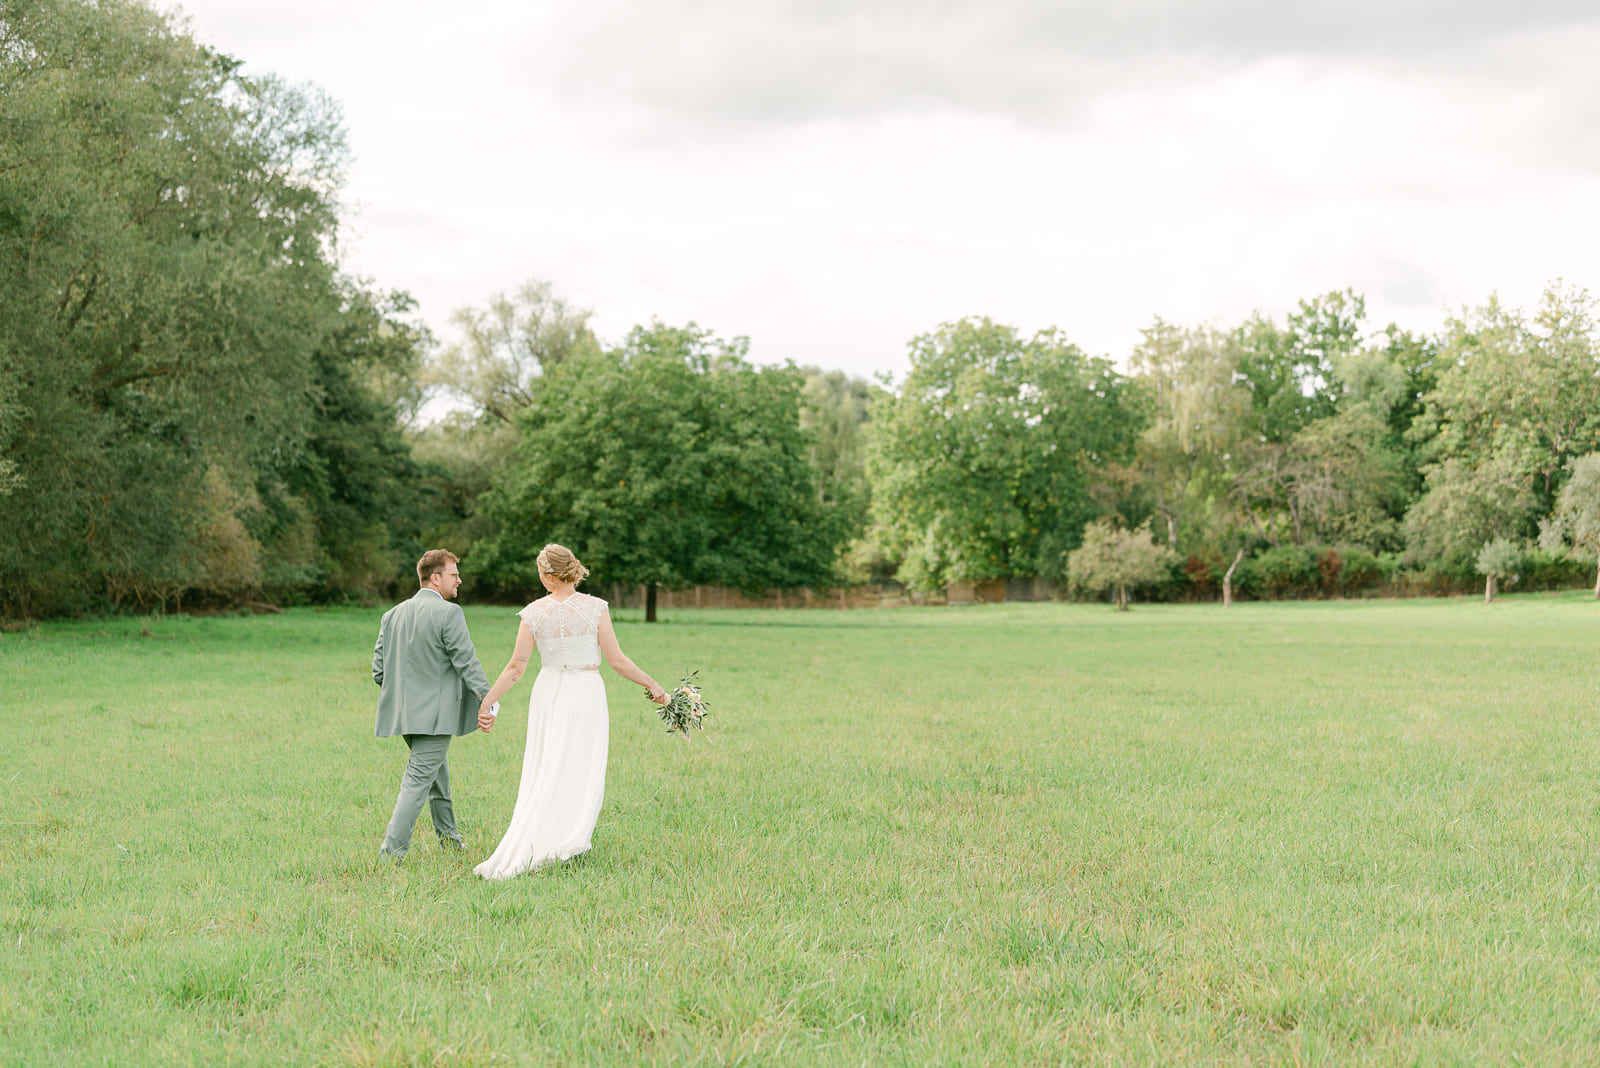 Wedding couple on meadow walking away from camera holding hands